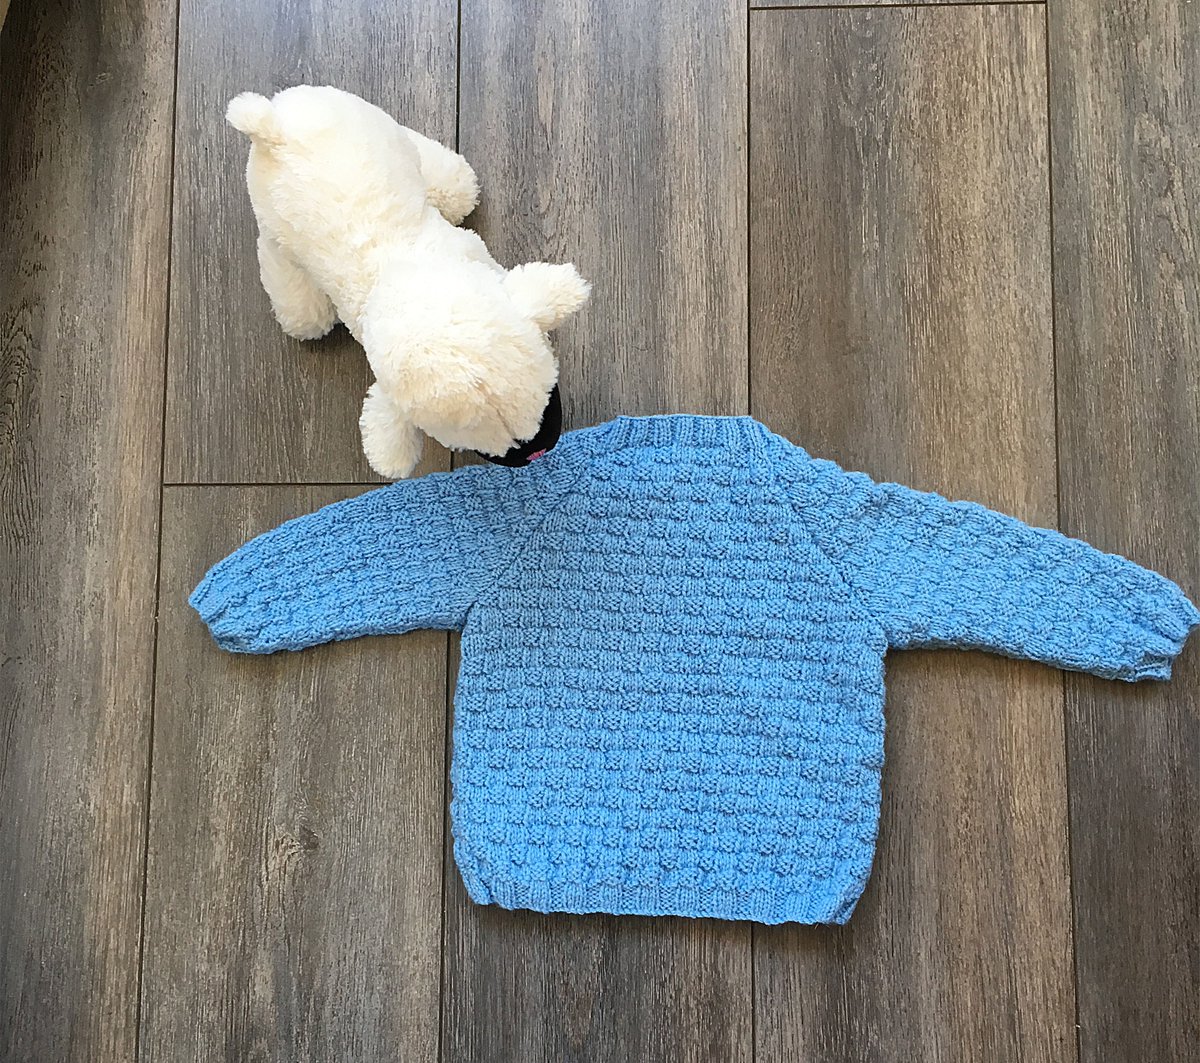 Listed today on …ttishknitwearforkidsandgrownups.co.uk and scottishknitwearforkidsandgrownups.com - hand knitted baby boy jumper to fit age 6 - 12 months Front opening on each side of neck to slip over little heads #womeninbiz #creativebizhour #shopscotland #QueenOf  #MondayMotivaton #TheCraftingHouse #wnukrt